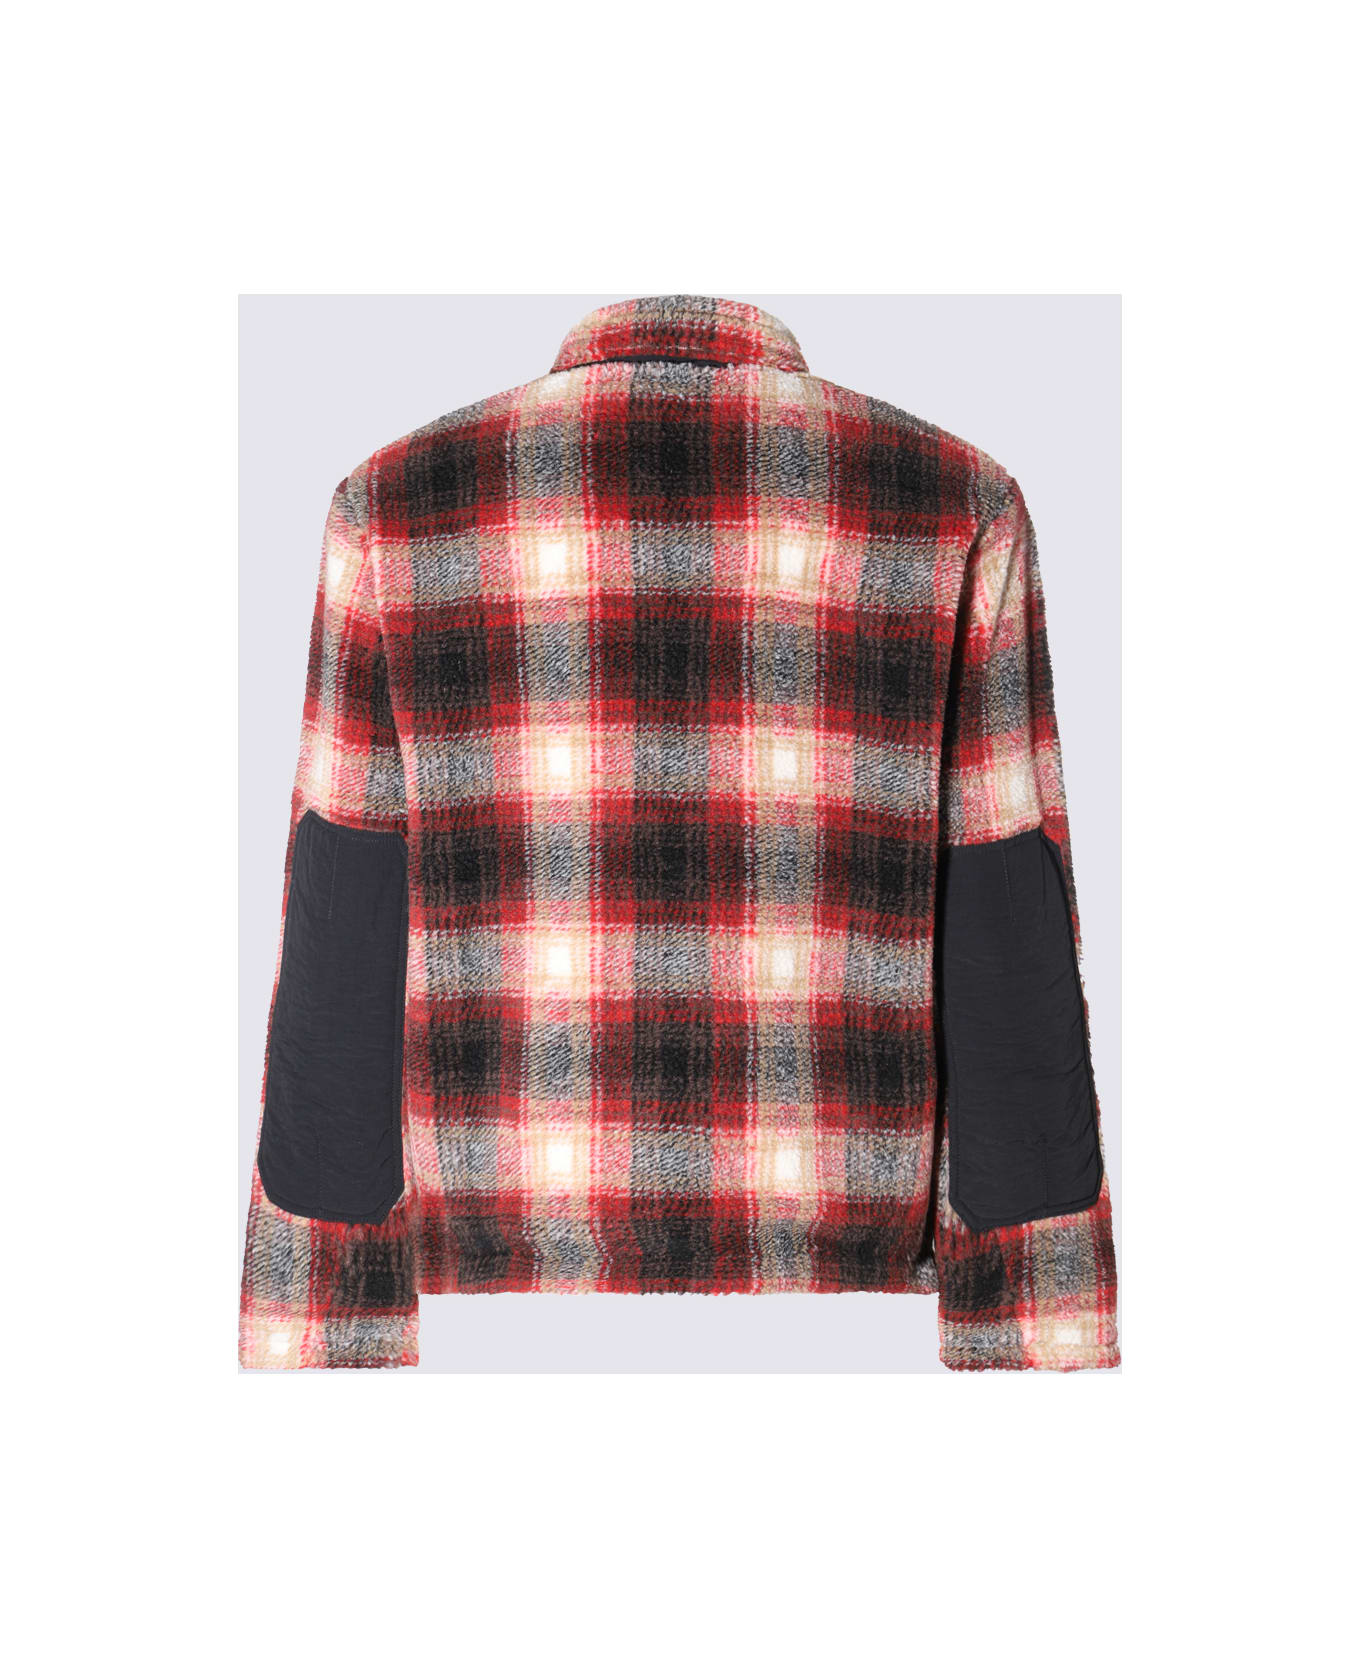 Woolrich Multicolor Casual Jacket - Red